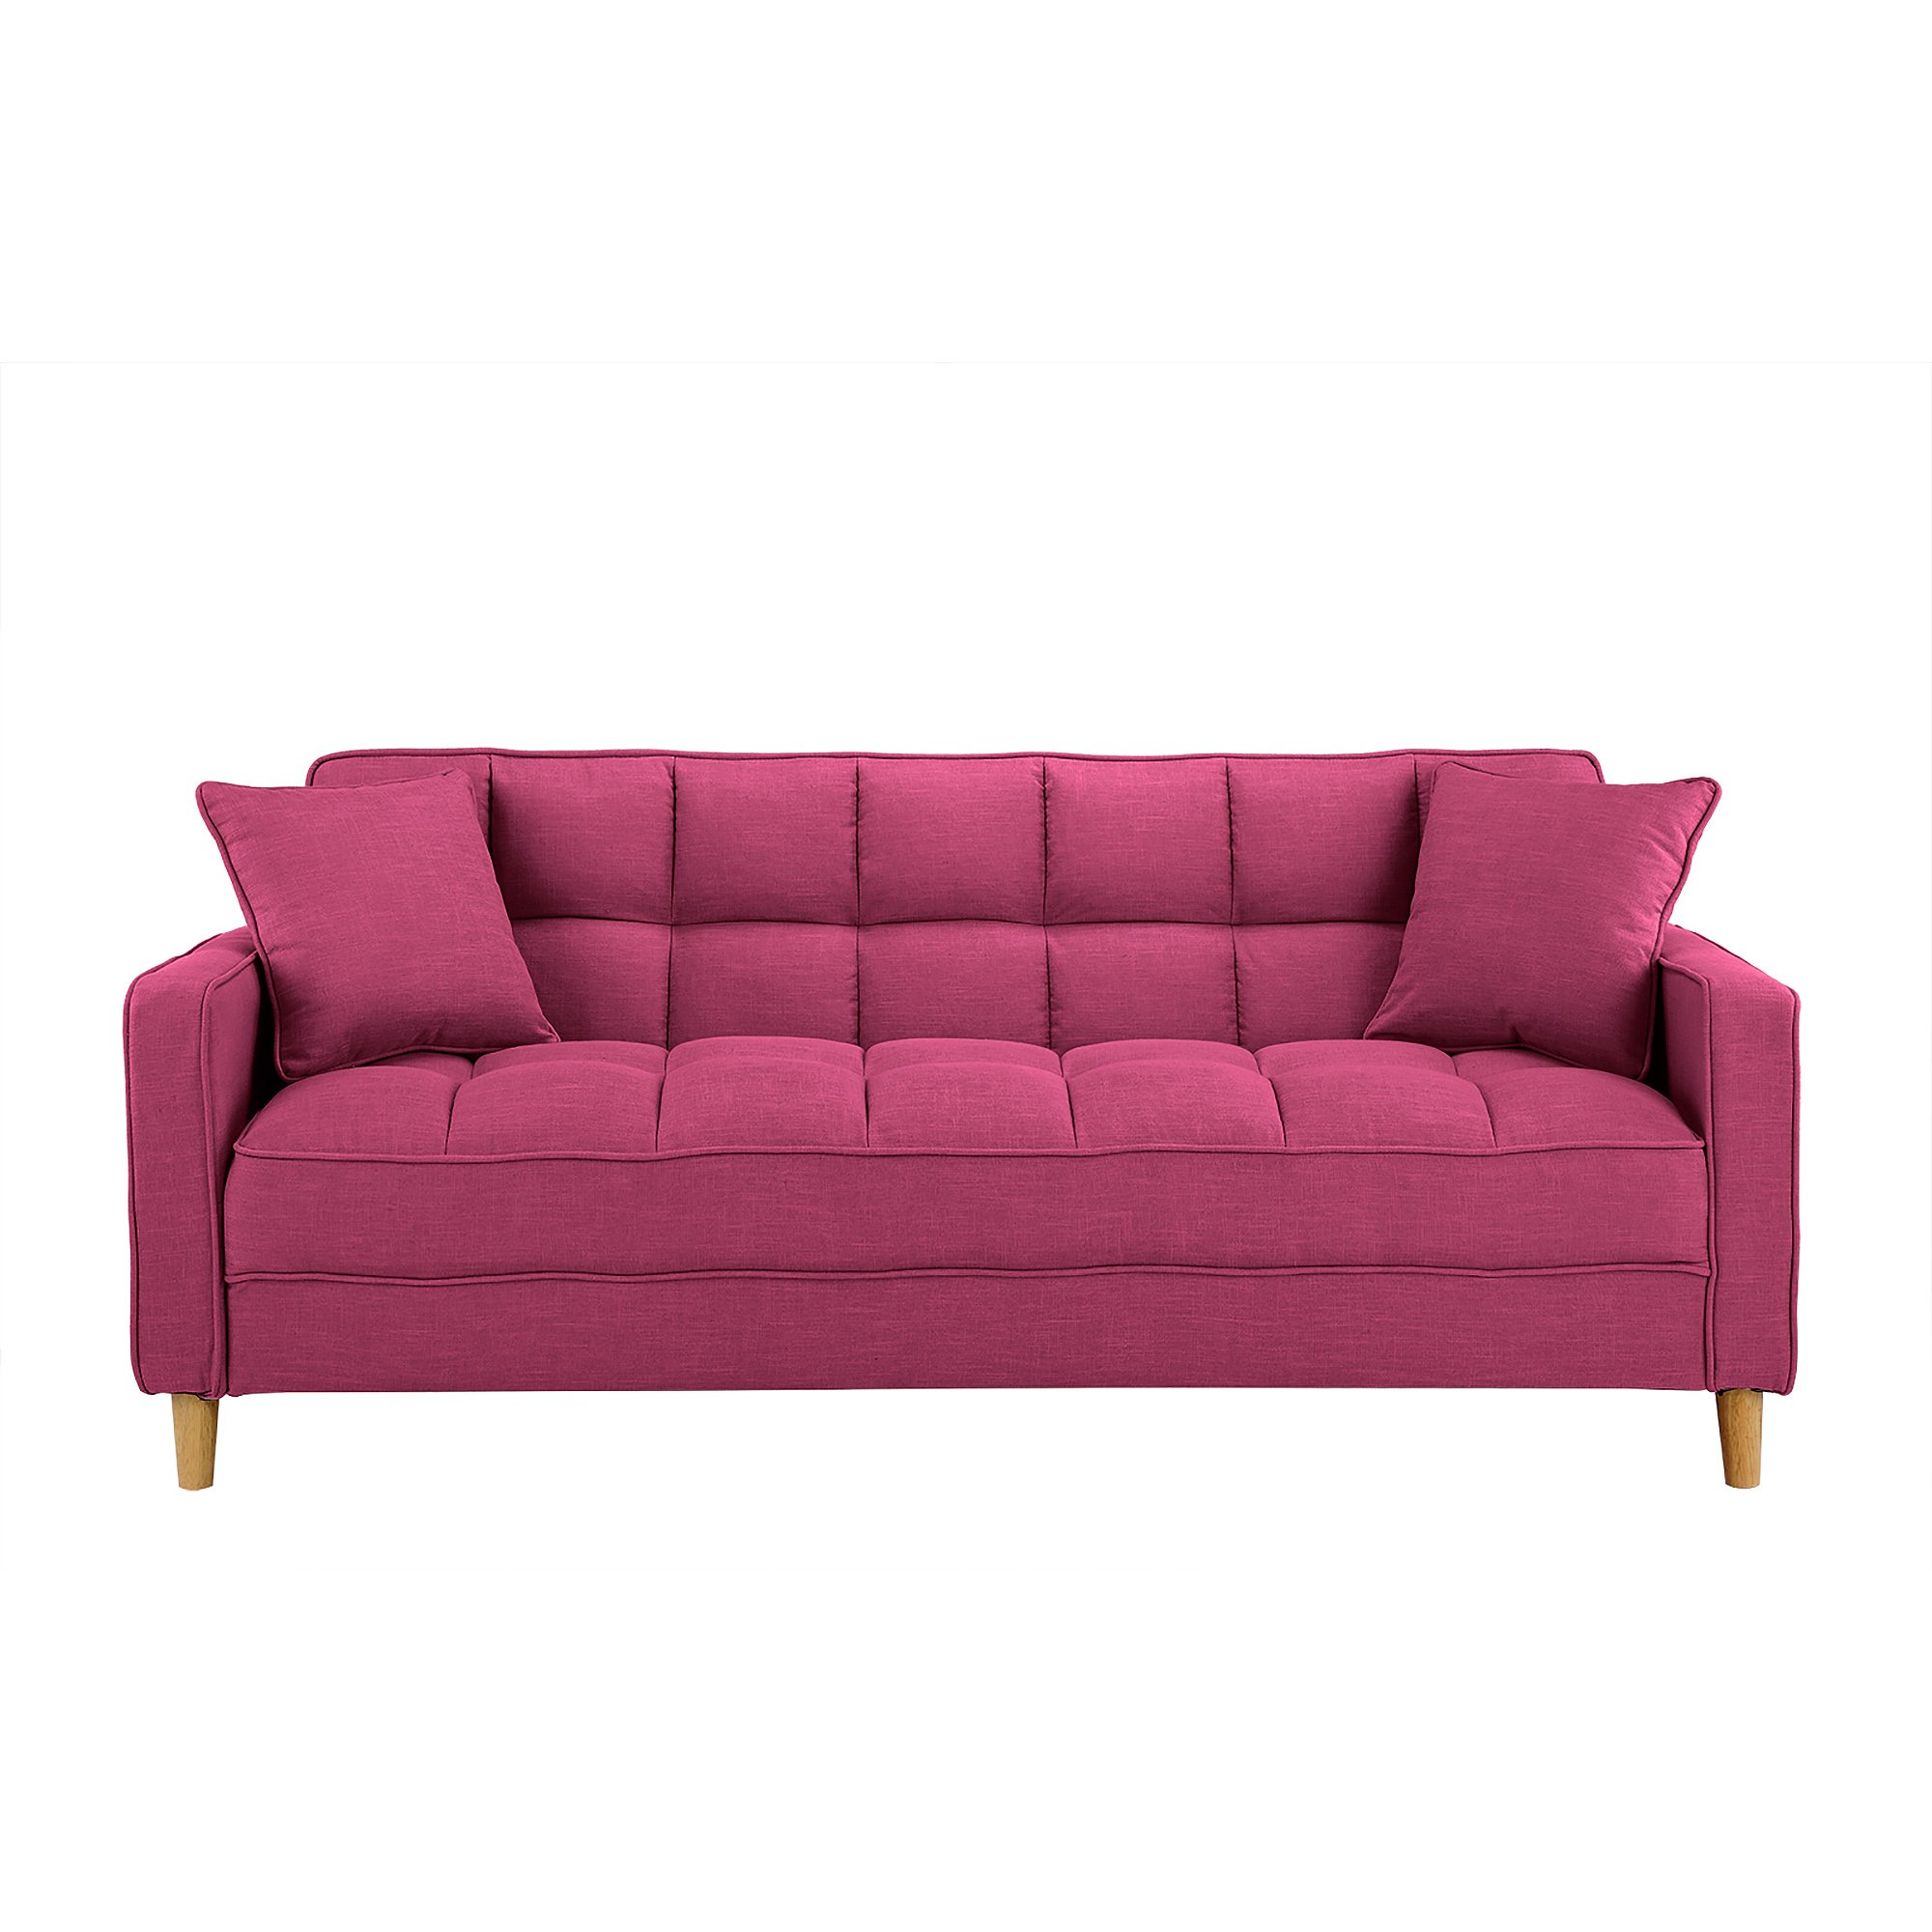 Modern Linen Fabric Tufted Small Space Living Room Sofa Couch (Hot Pink ...